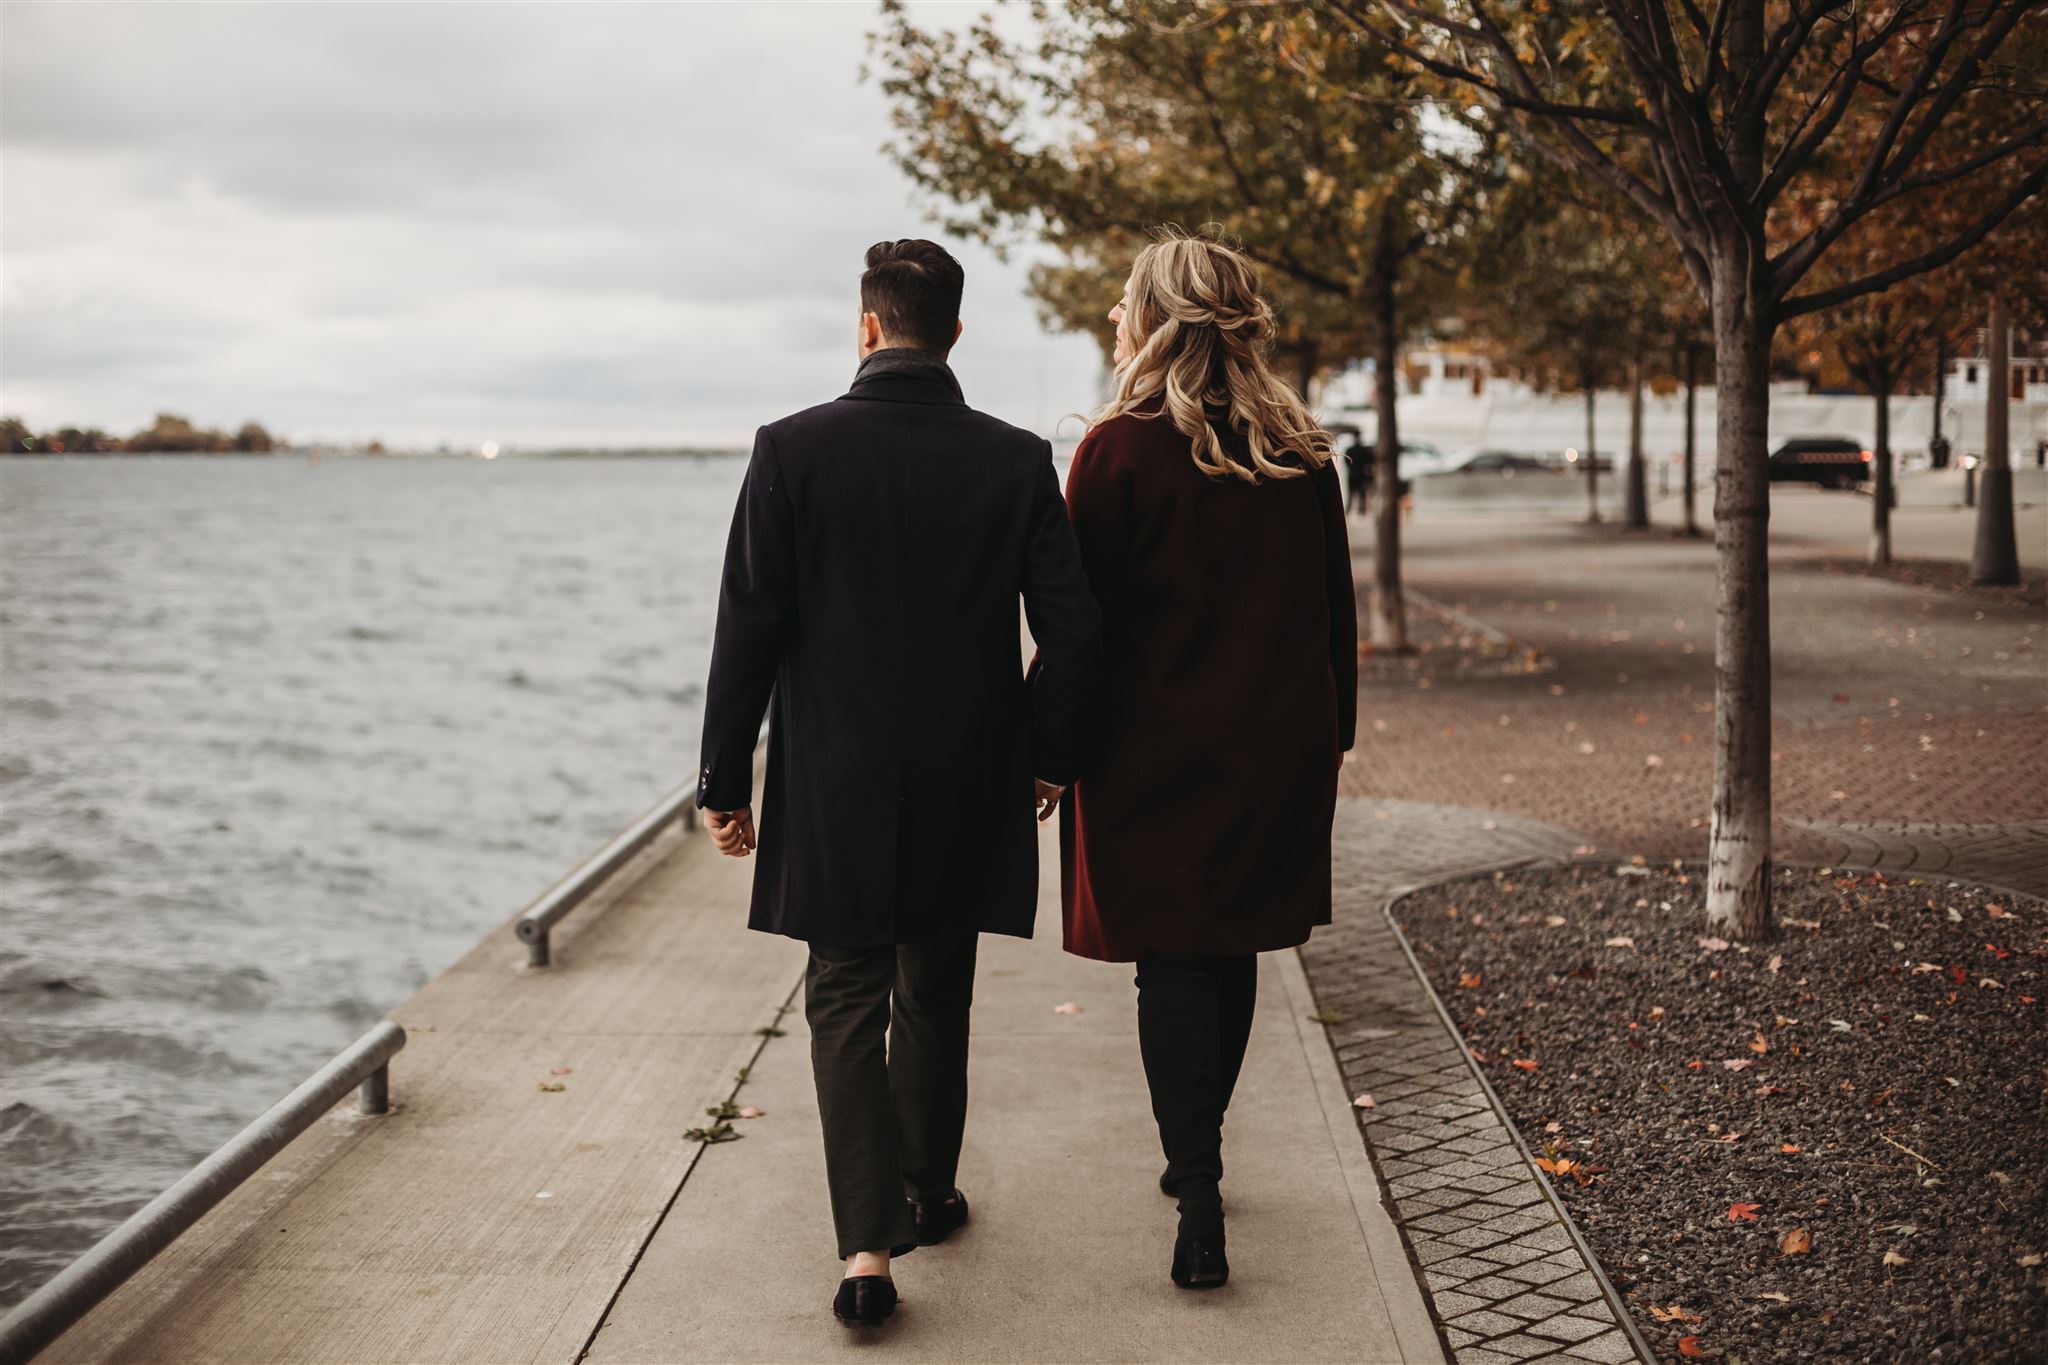 photography locations in toronto, harbourfront engagement photos